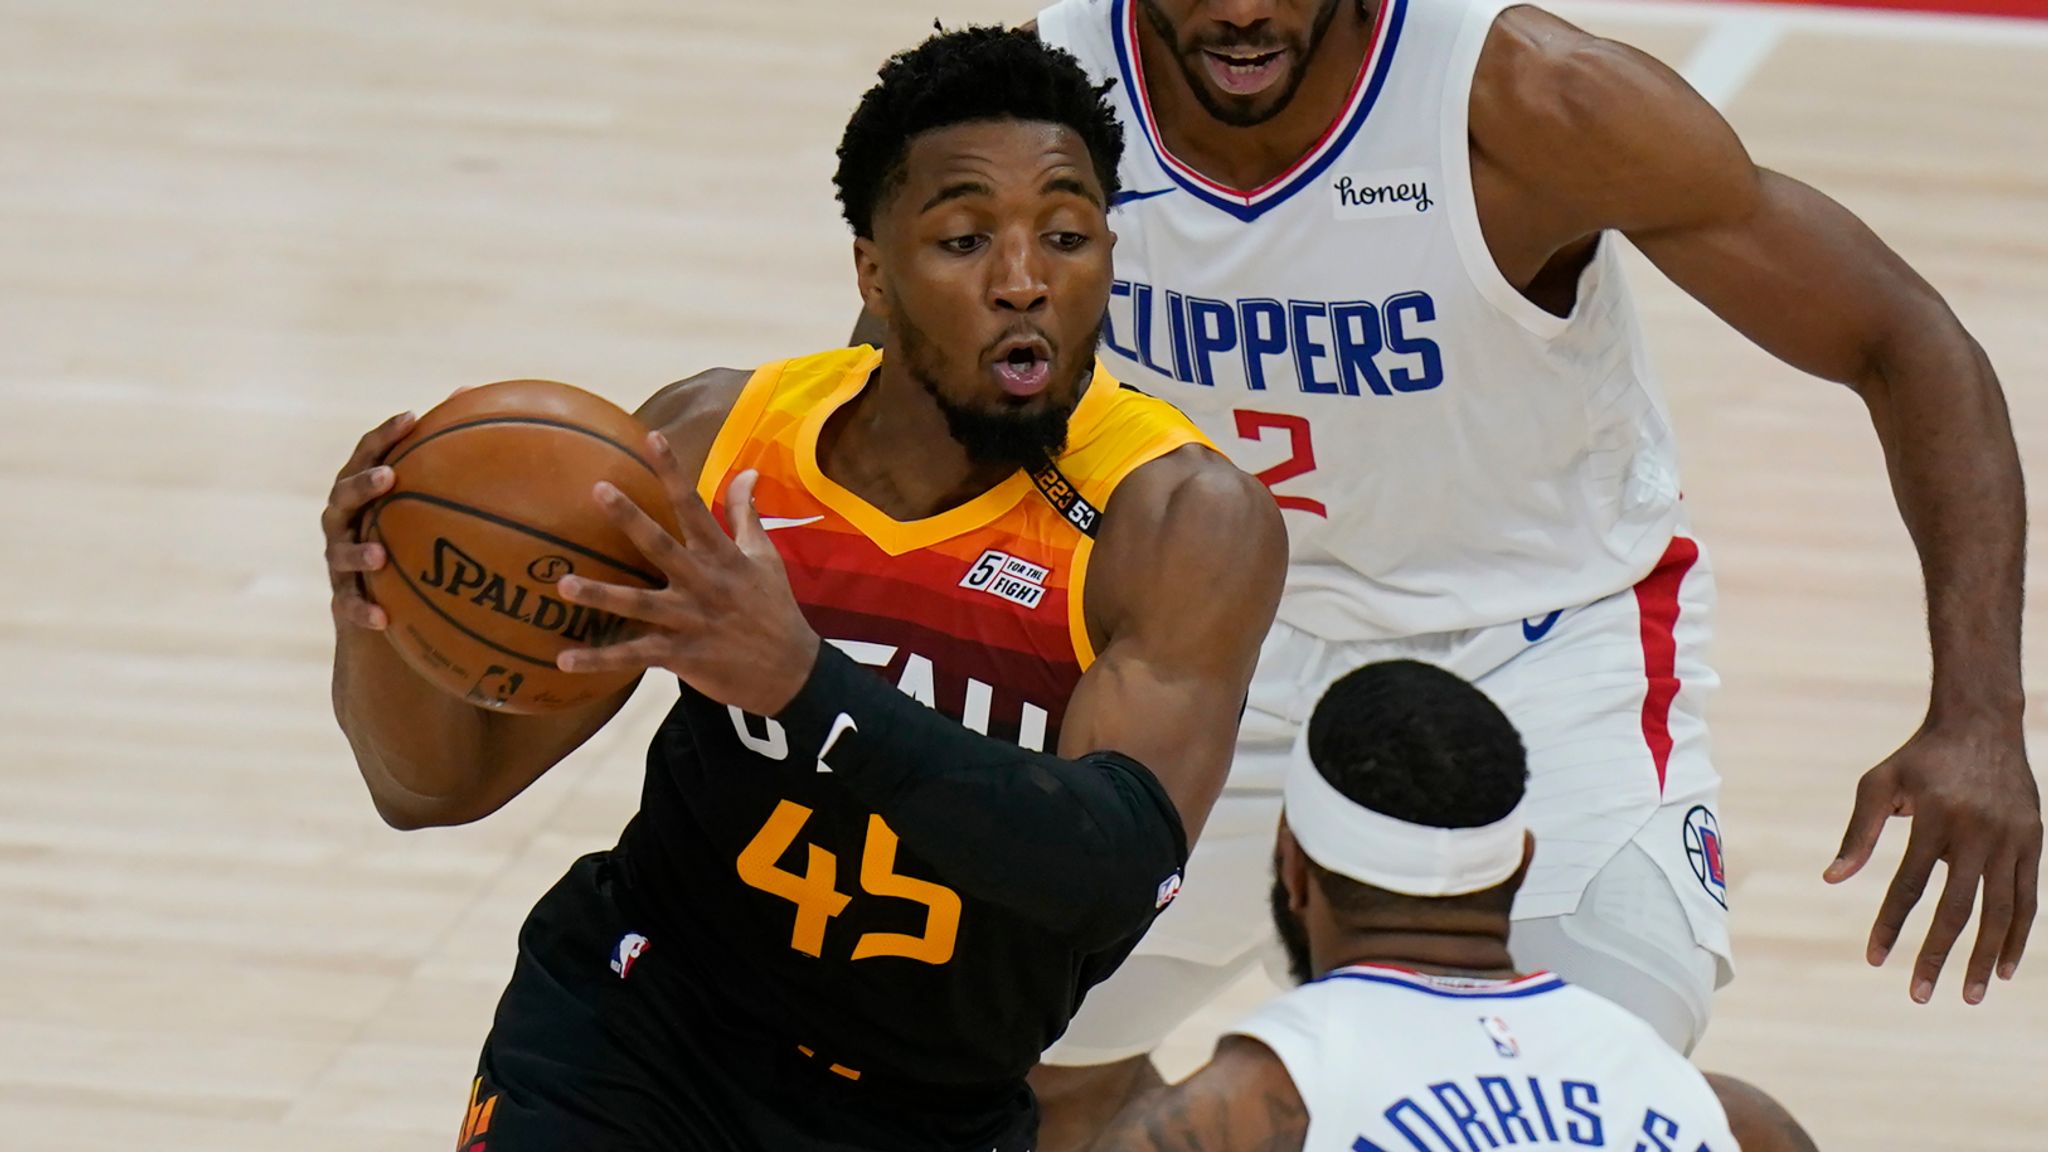 Paul George erupts for 34 points in return as Clippers rally past